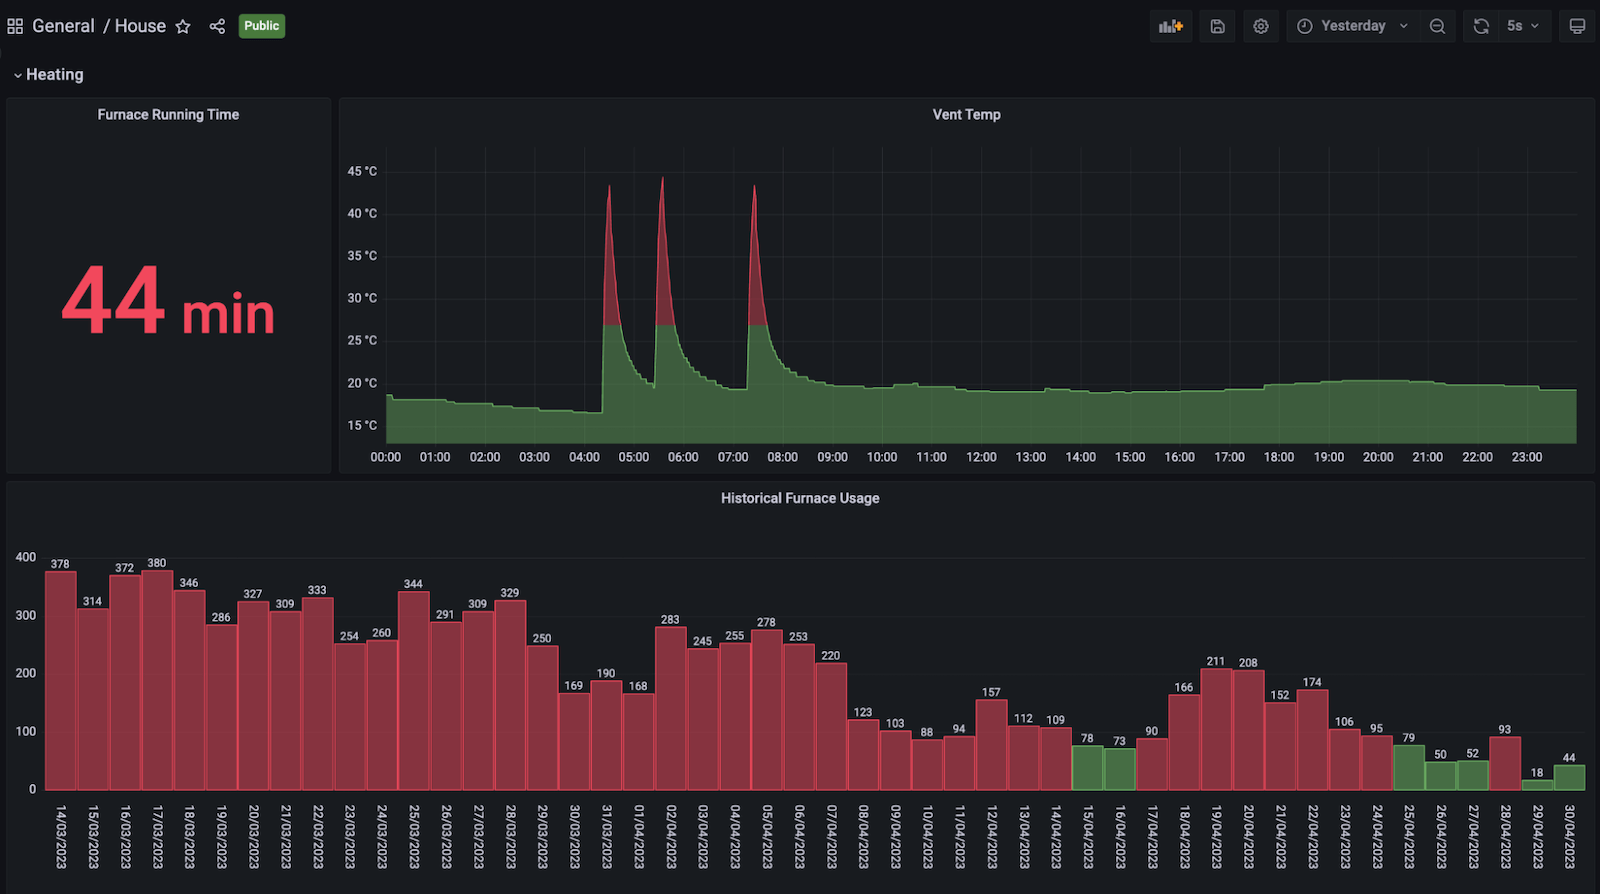 A Grafana dashboard with panels showing furnace running time, vent temperature, and historical furnace usage.